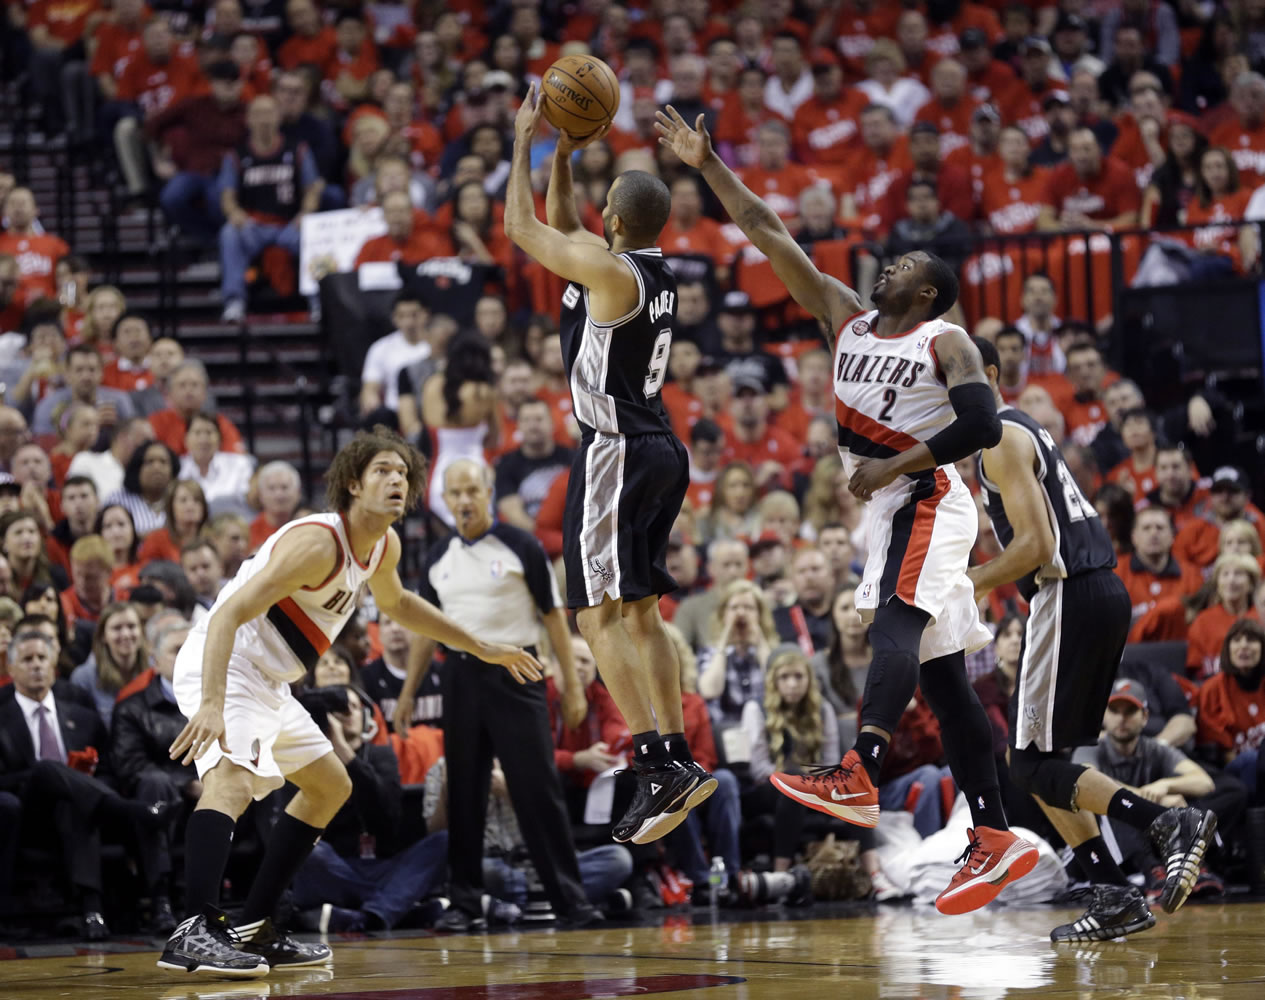 San Antonio Spurs' Tony Parker (9) shoots as Portland Trail Blazers' Robin Lopez (42) and Wesley Matthews (2) defend in the first quarter of Game 3 on Saturday.